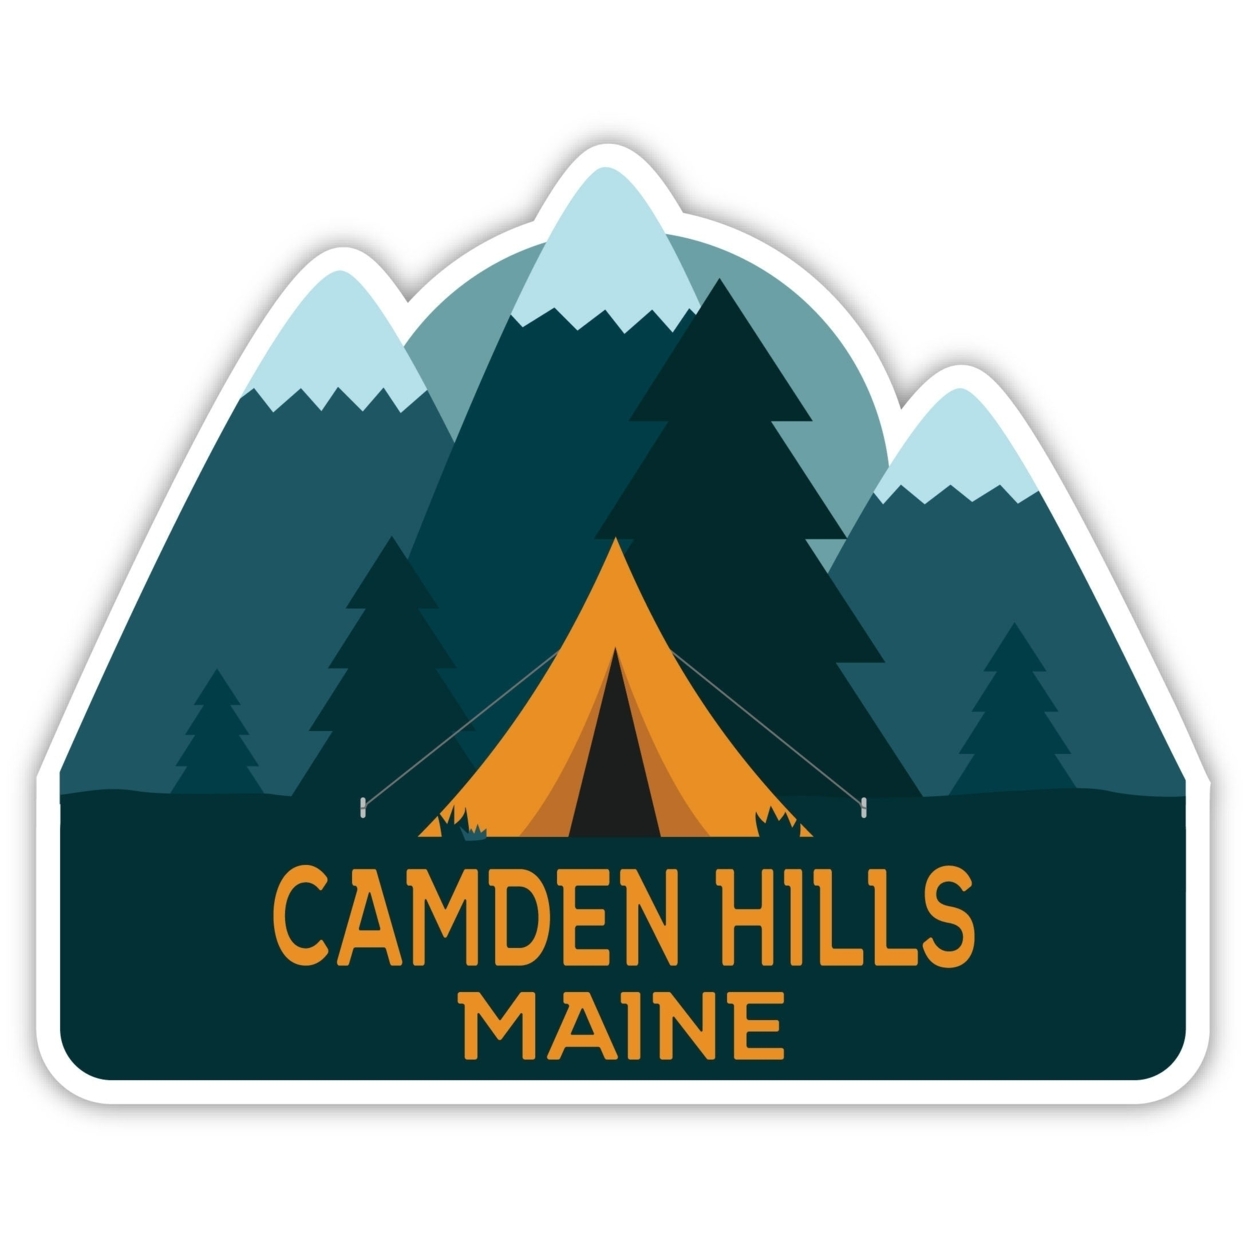 Camden Hills Maine Souvenir Decorative Stickers (Choose Theme And Size) - 4-Pack, 4-Inch, Tent